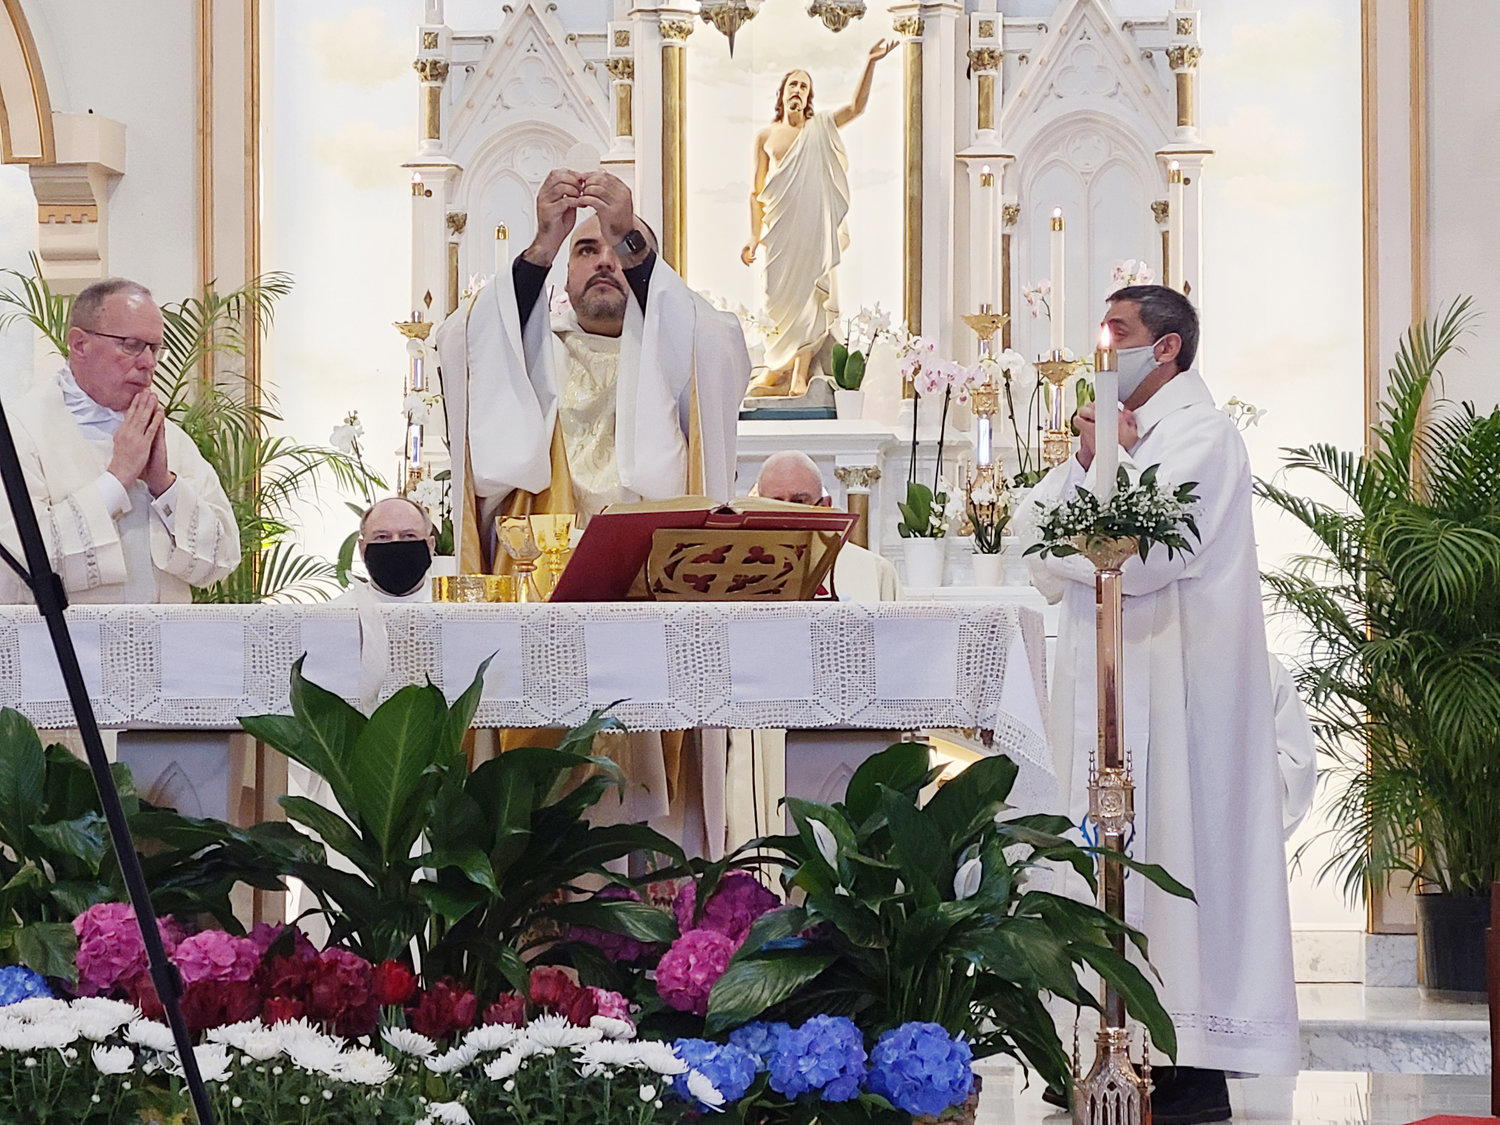 Father Ezio Antunes, CSP, consecrates the Eucharist during the Memorial Mass in honor of St. Elizabeth Church’s late pastor Father Marinaldo Batista, who died from COVID-19 complications in his native Brazil on April 1, Holy Thursday.